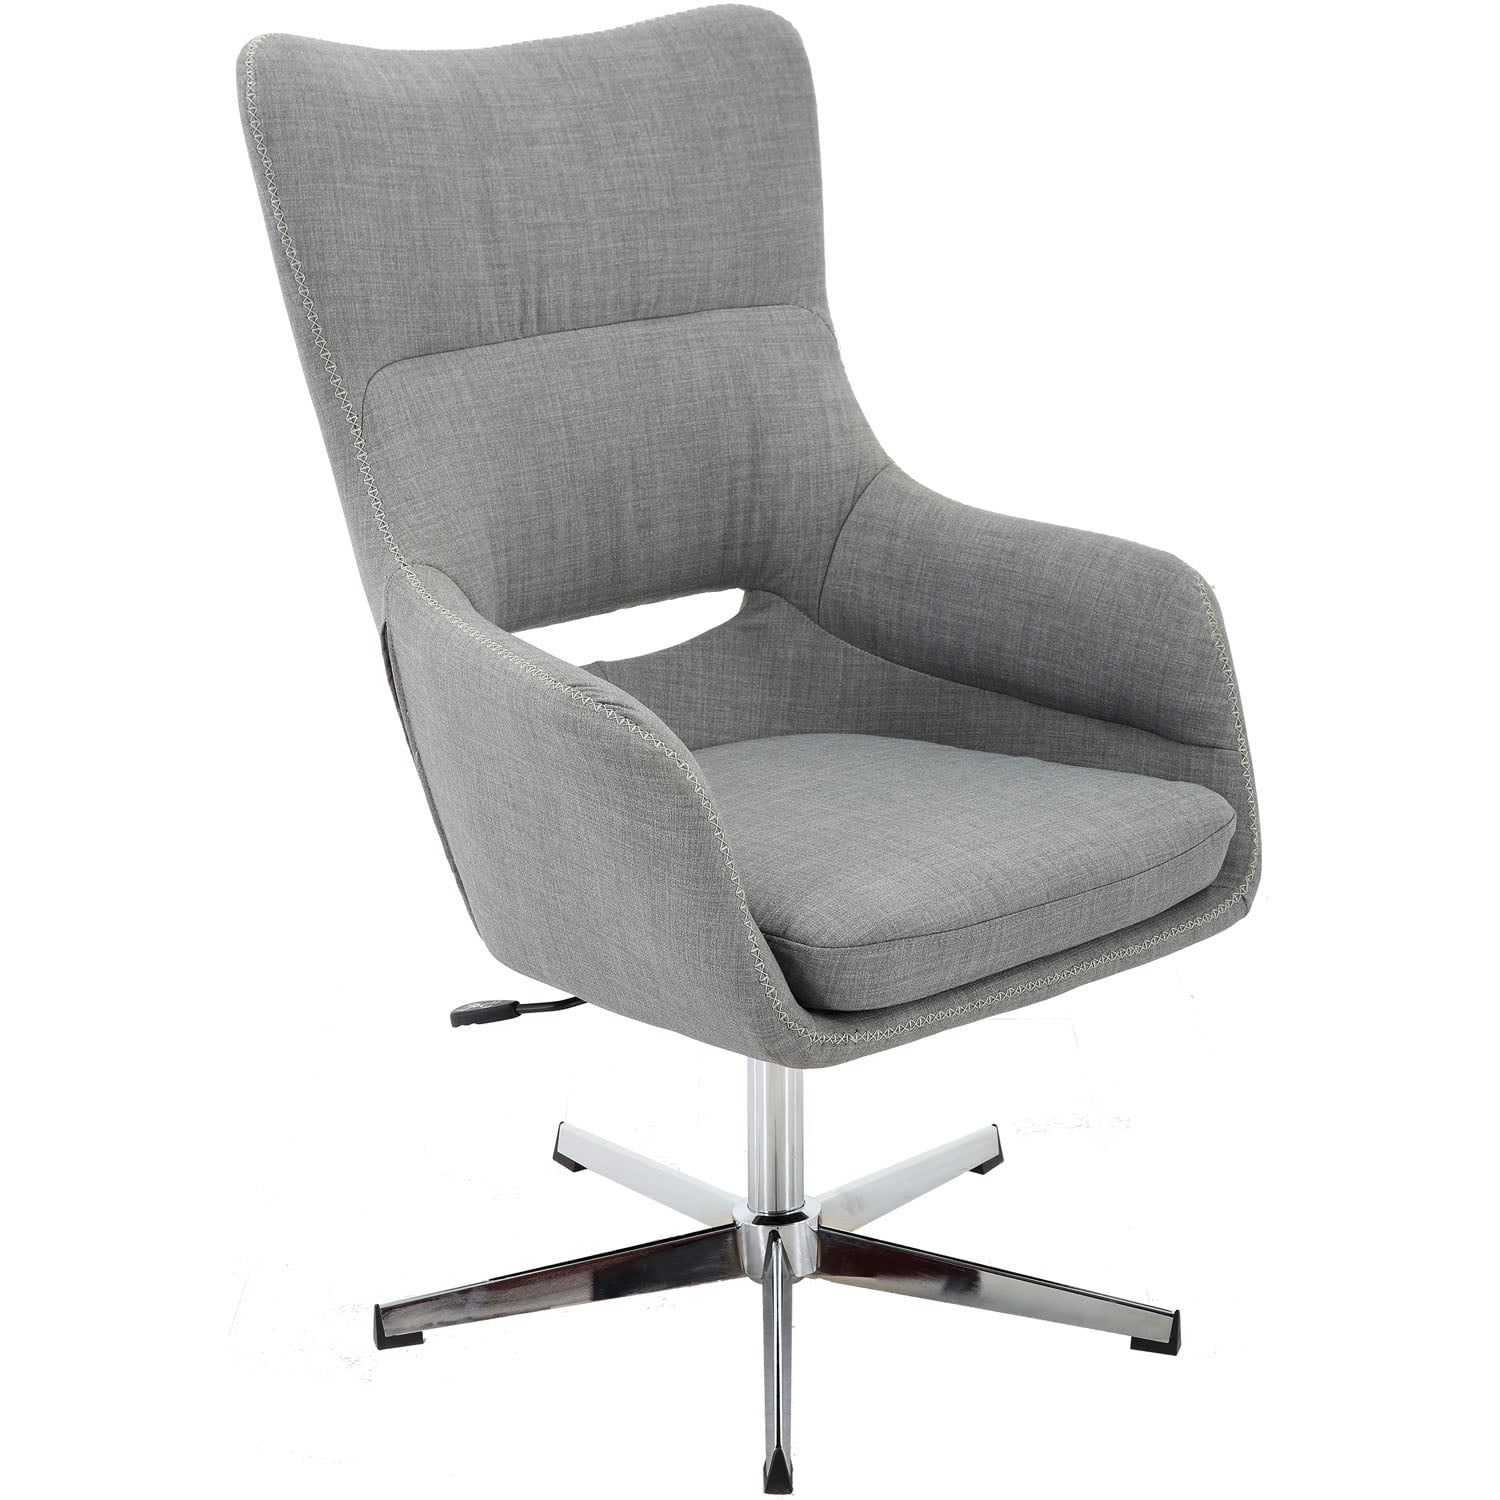 Hoc0007 Carlton Wingback Stationary Office Chair With Adjustable Gas Lift Seating & Chrome Base, Gray